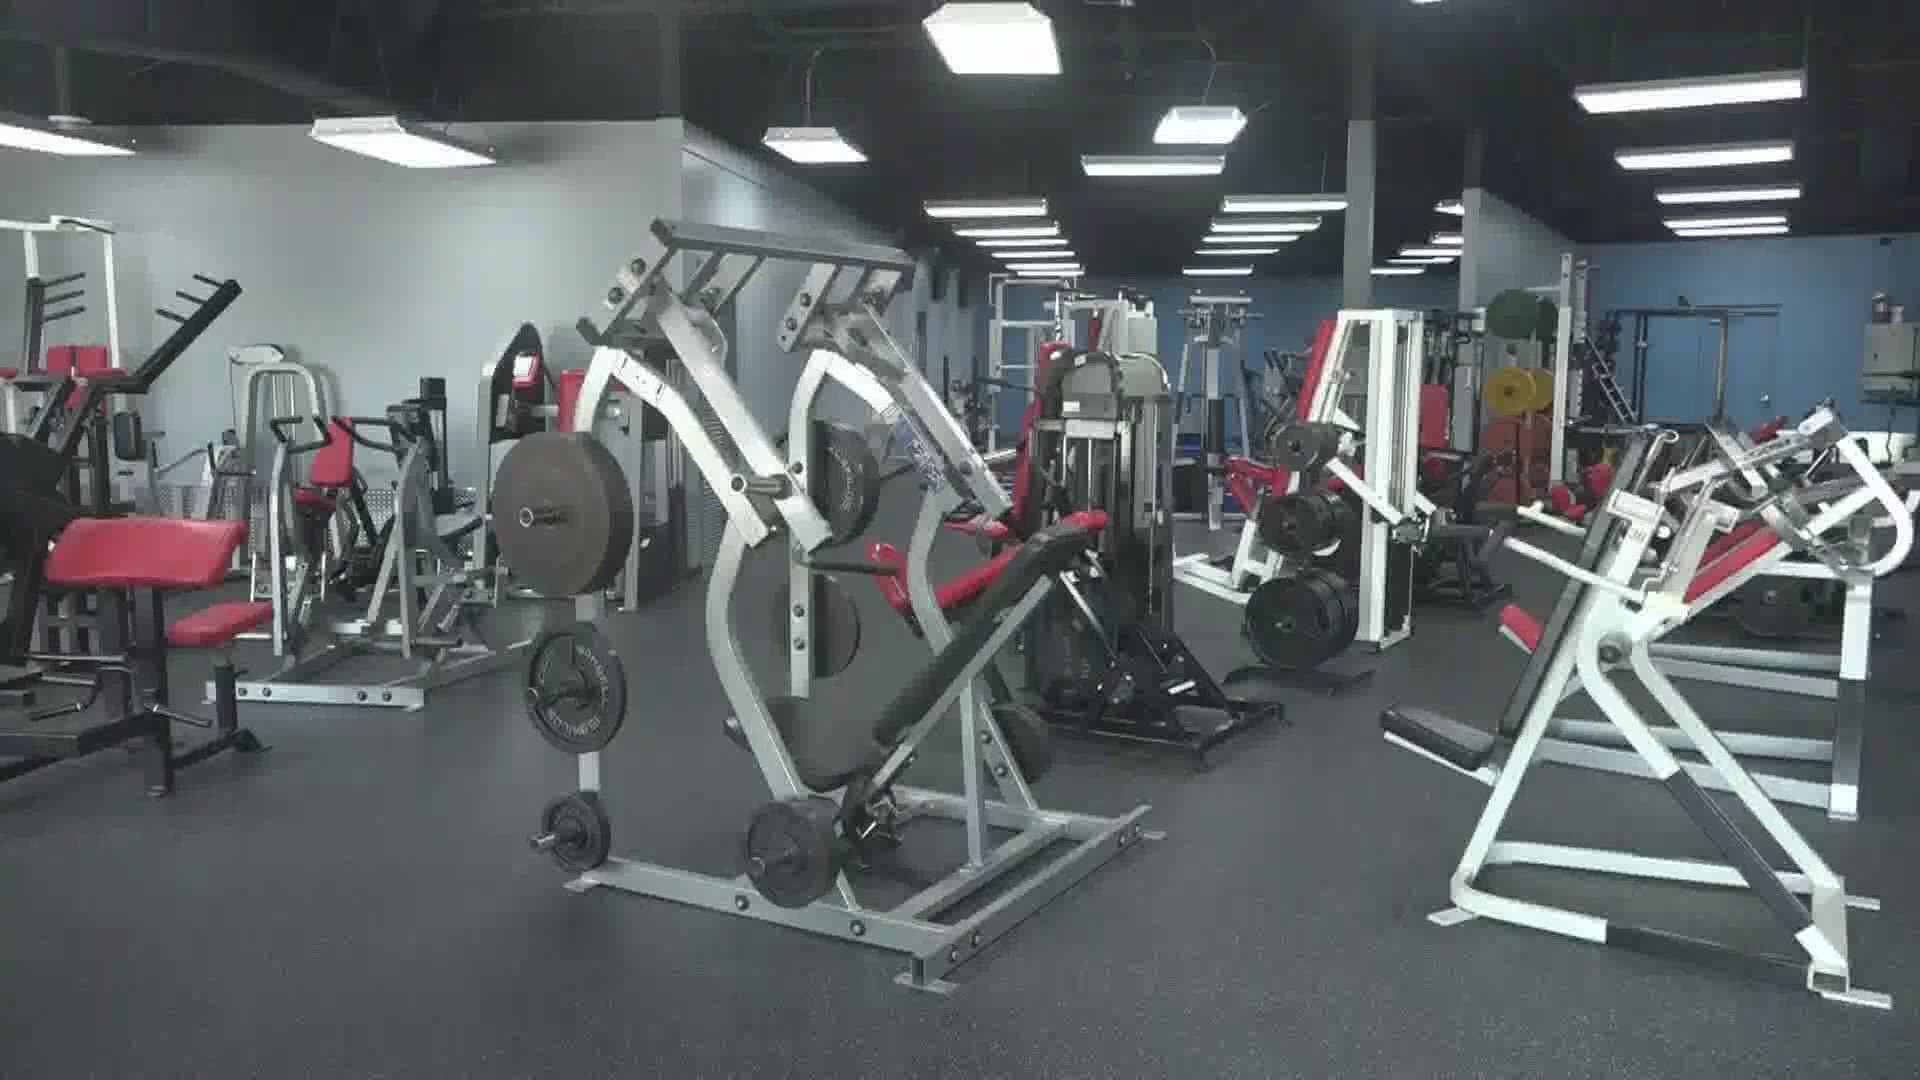 Gym owners are excited to open their doors and hire their employees back after 6 long months.